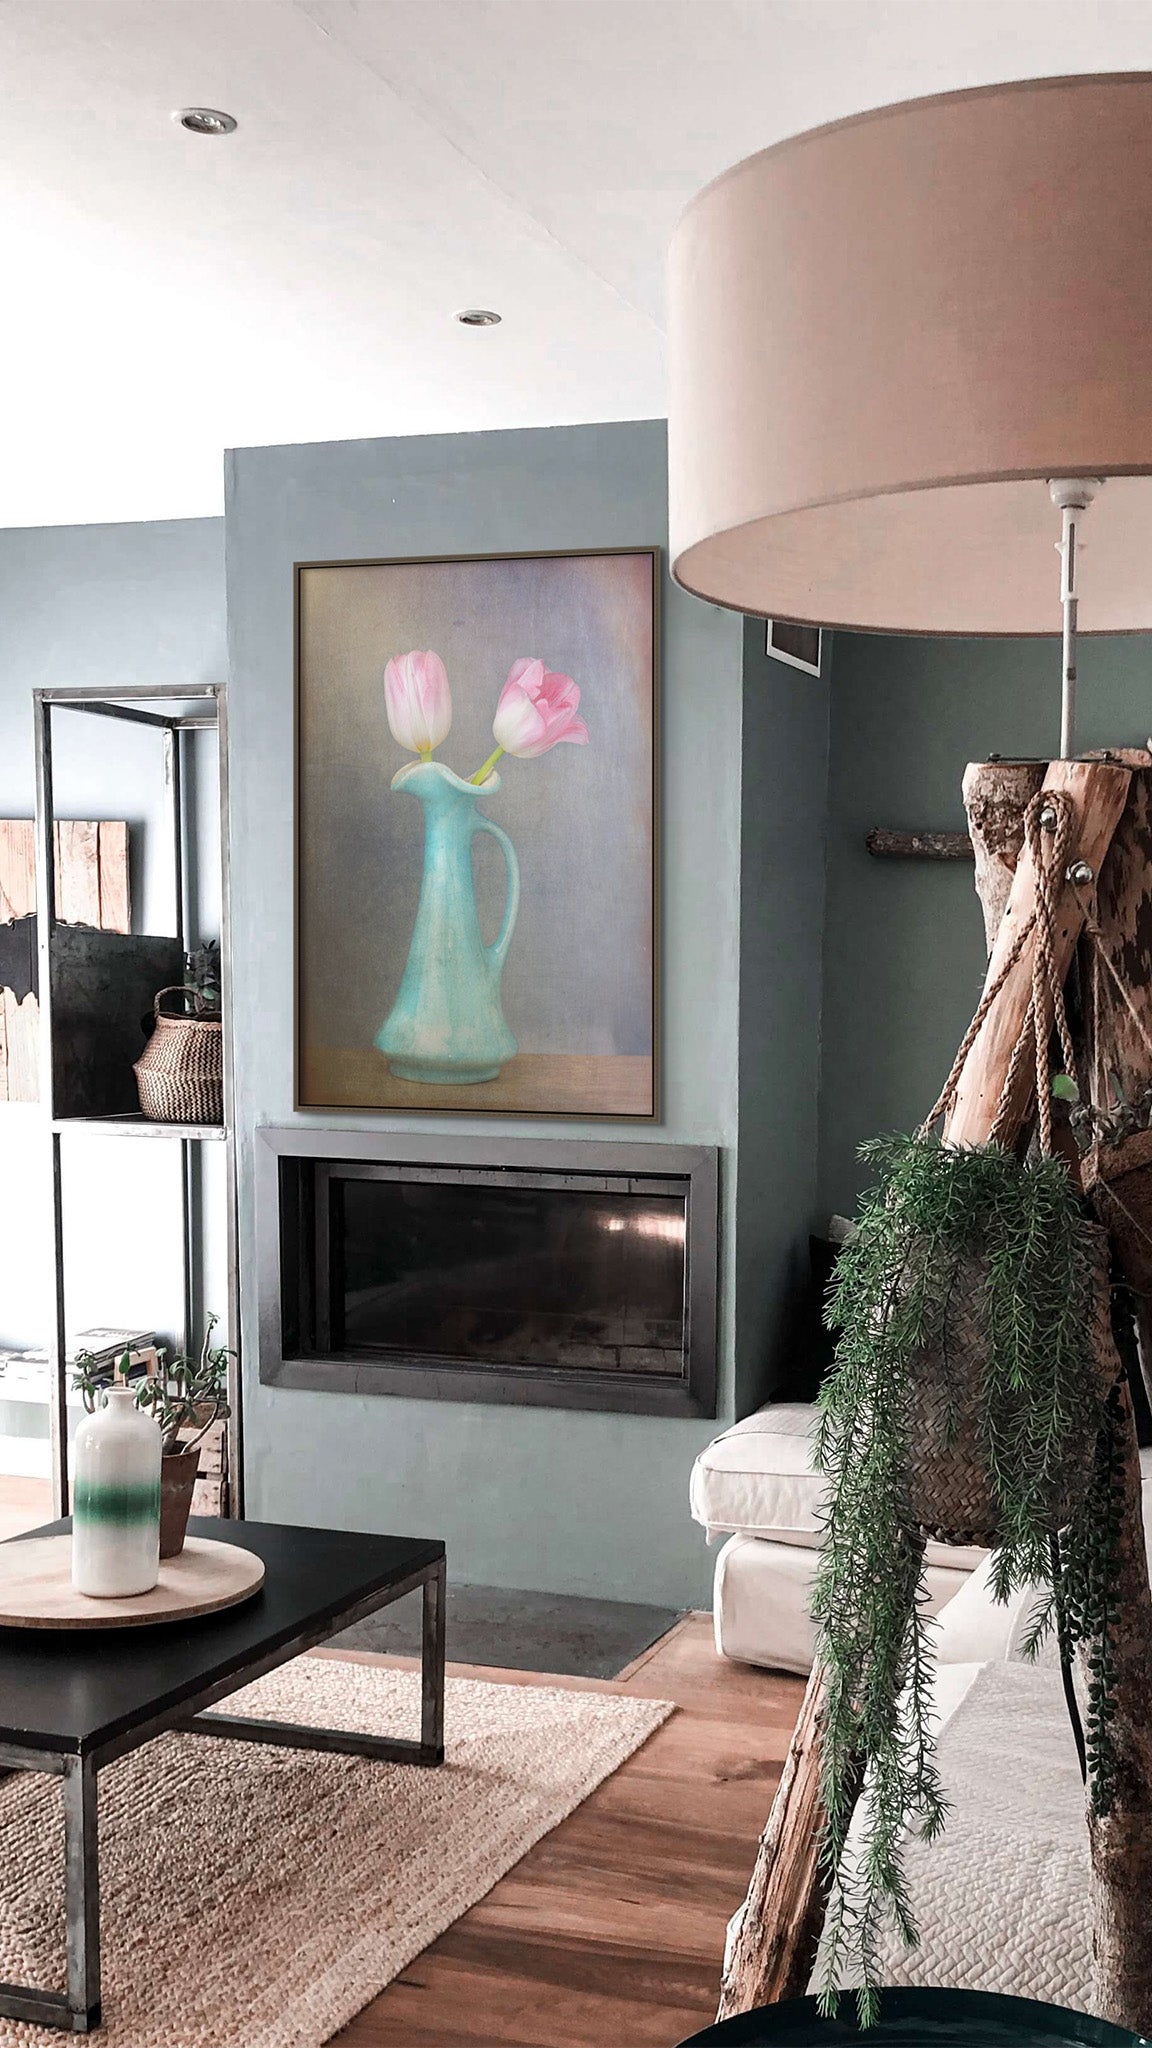 Picture hanging on the wall of a living room. The picture is a fine art flower photograph of two pink tulips in a vase titled "An Ambitious Pair" by Cameron Dreaux of Dreaux Fine Art.